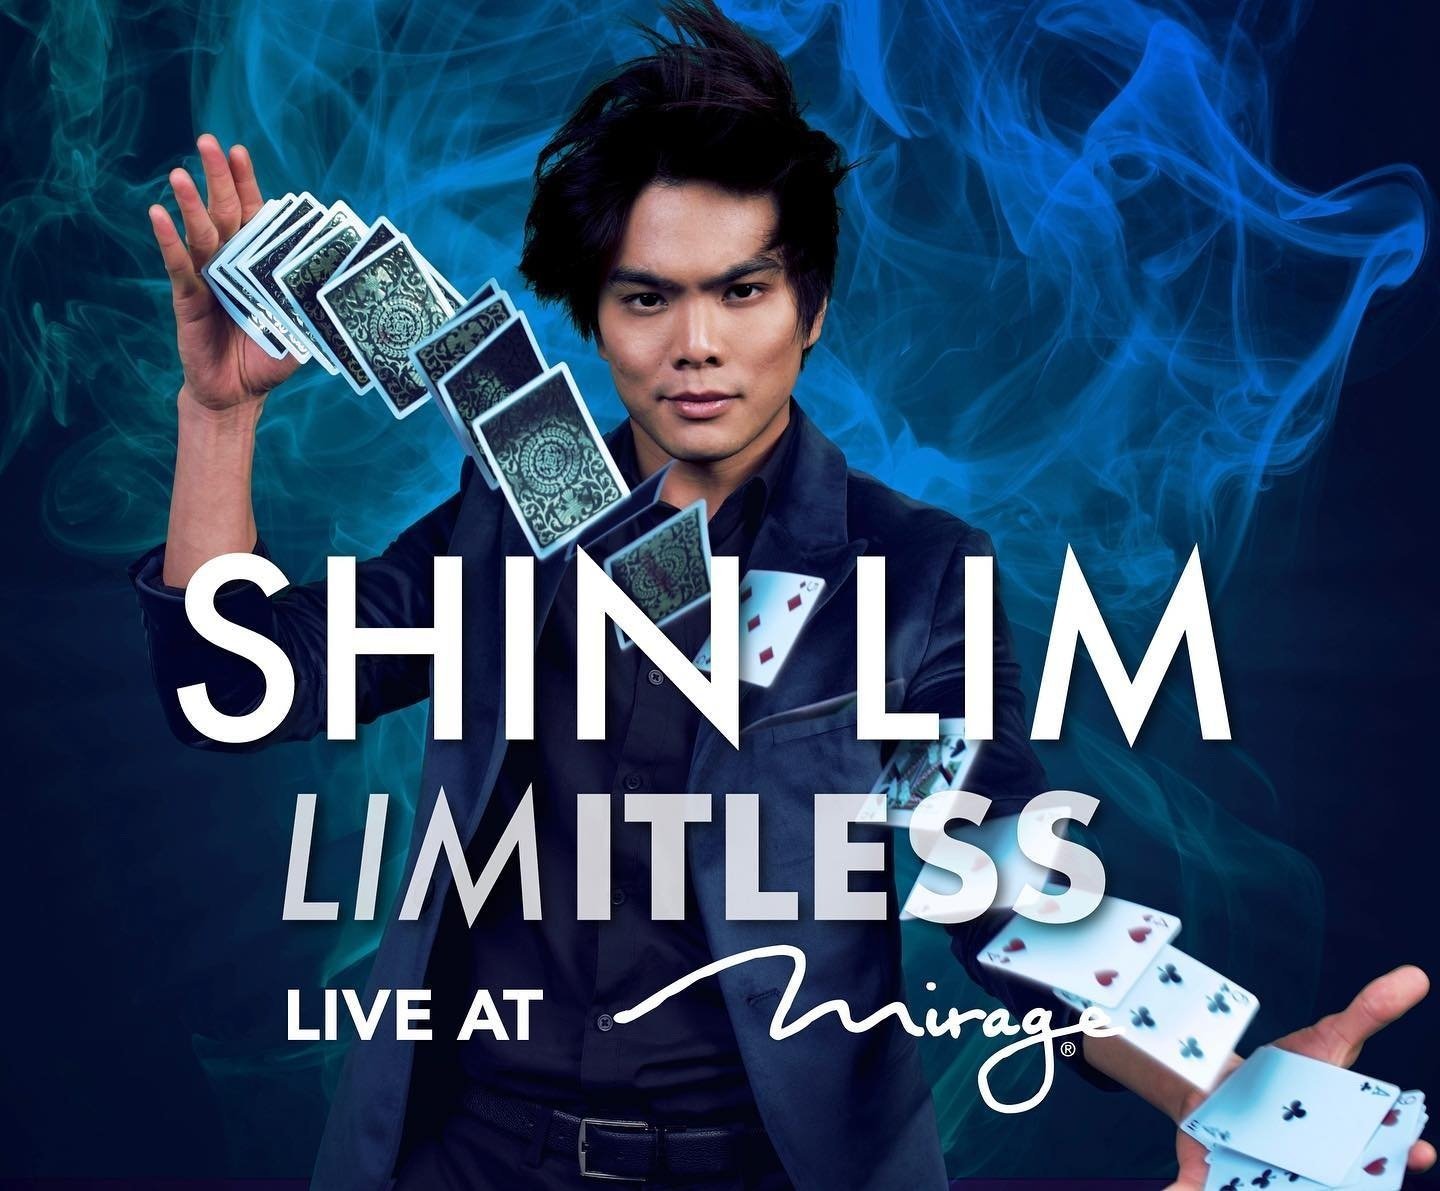 Illusionist Shin Lim is silhoutted onstage ahead of the reopening